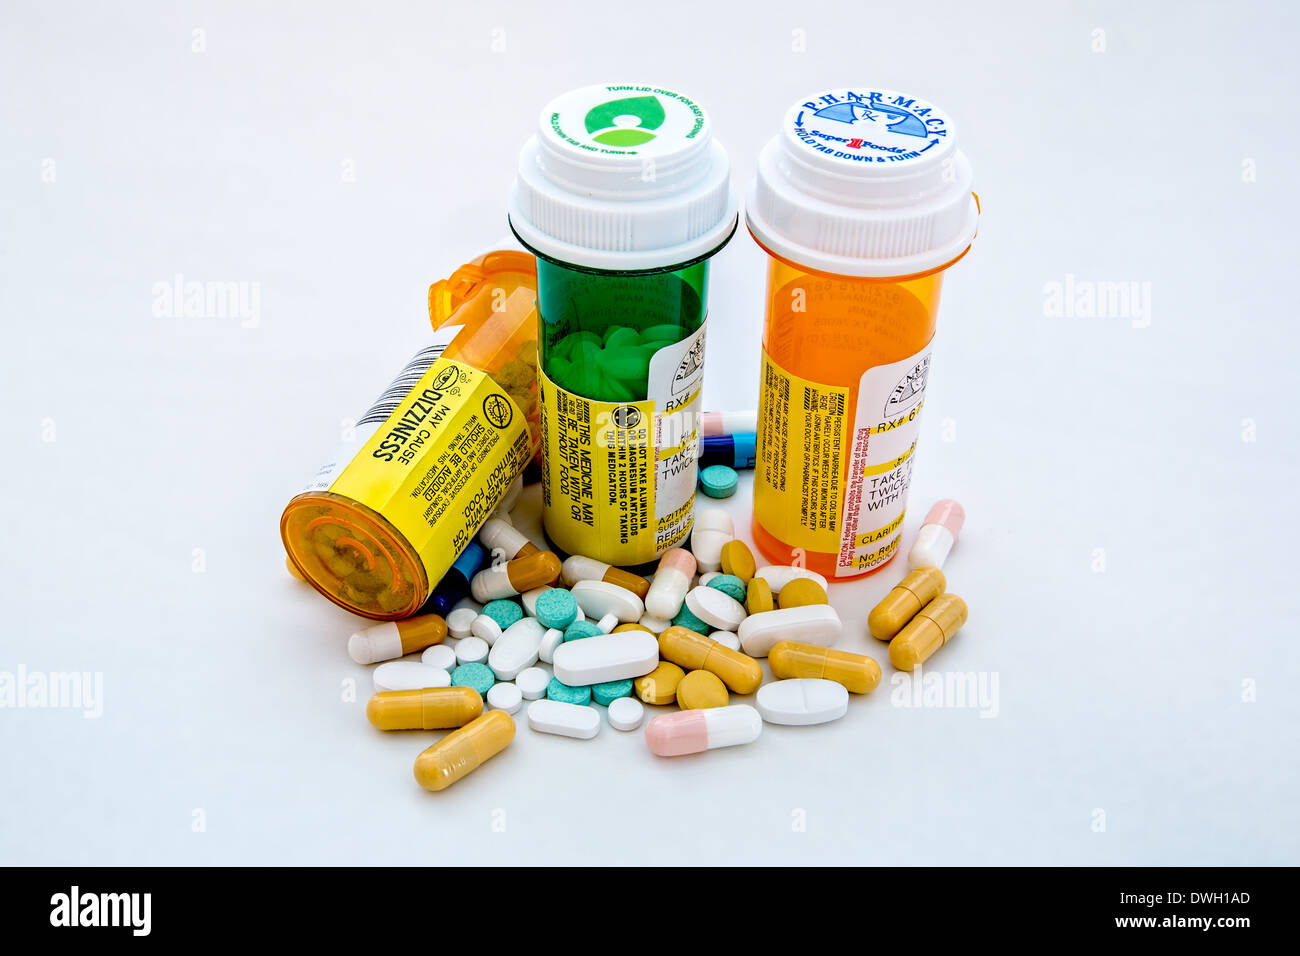 https://c8.alamy.com/comp/DWH1AD/prescription-pill-bottles-and-mixed-pills-laying-around-DWH1AD.jpg